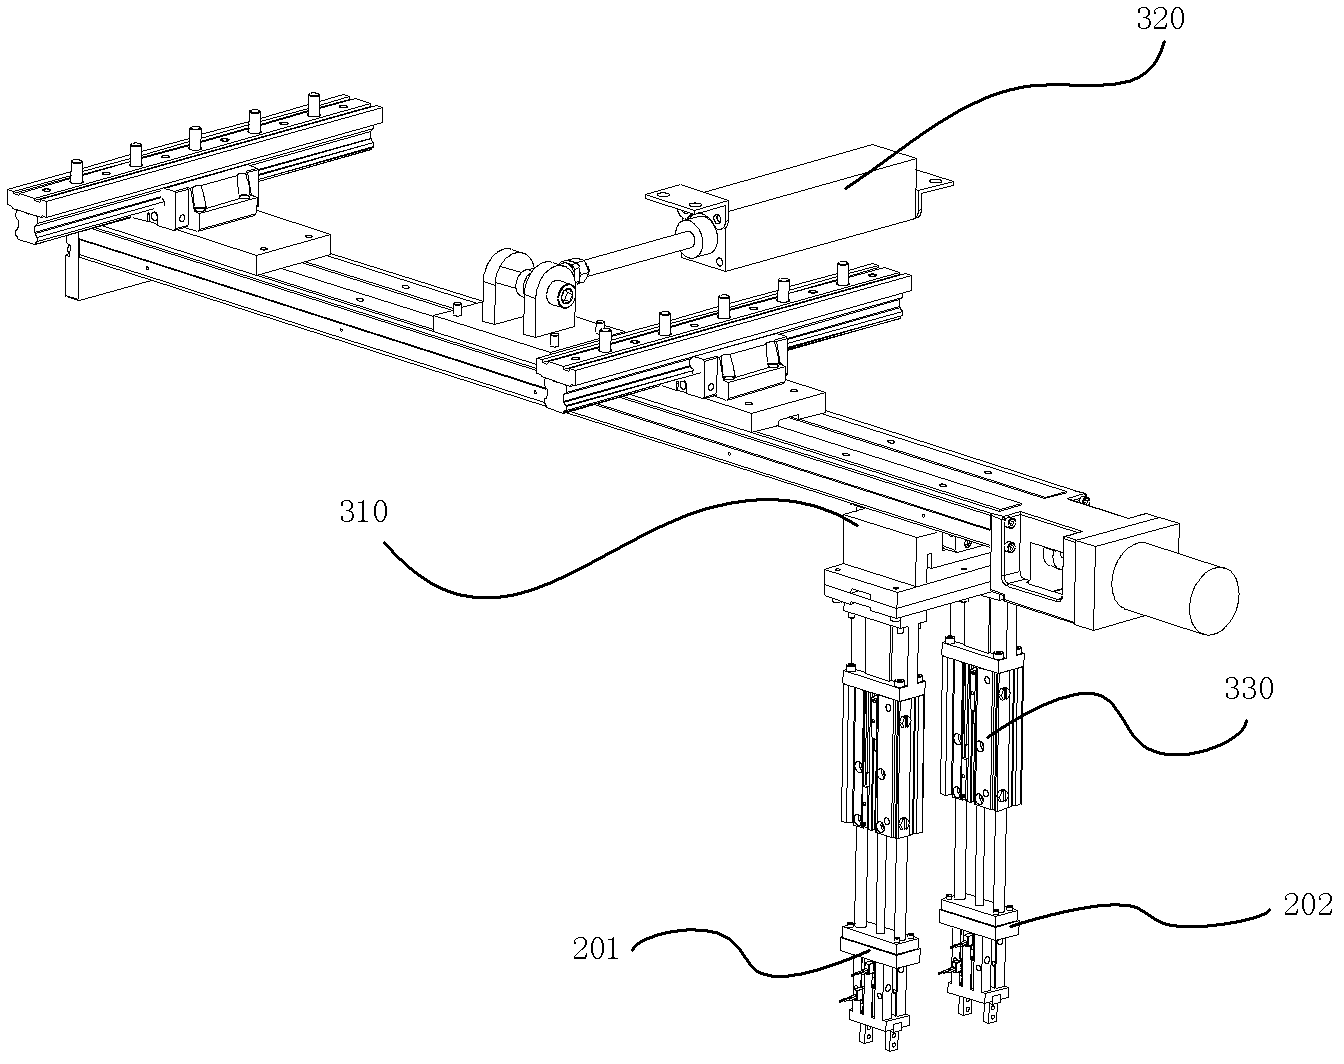 Mechanical arm capable of taking and placing materials